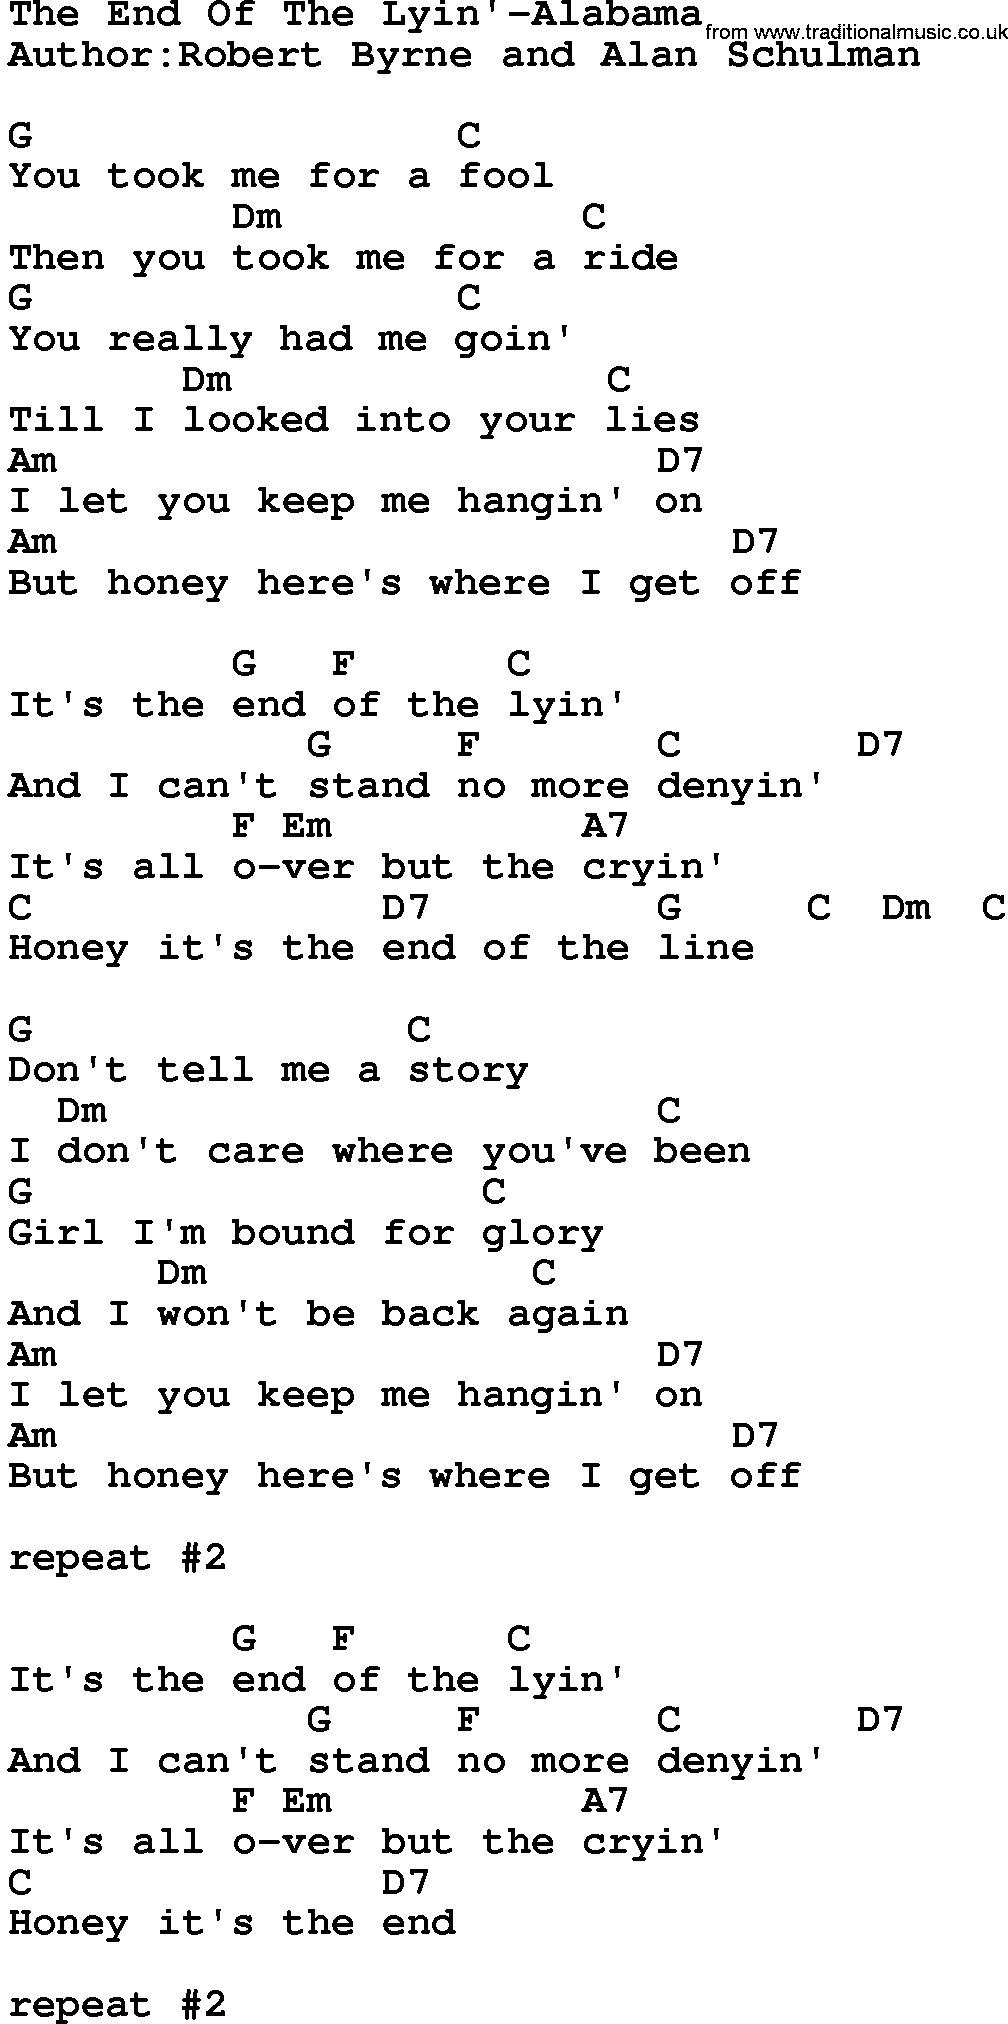 Country music song: The End Of The Lyin'-Alabama lyrics and chords